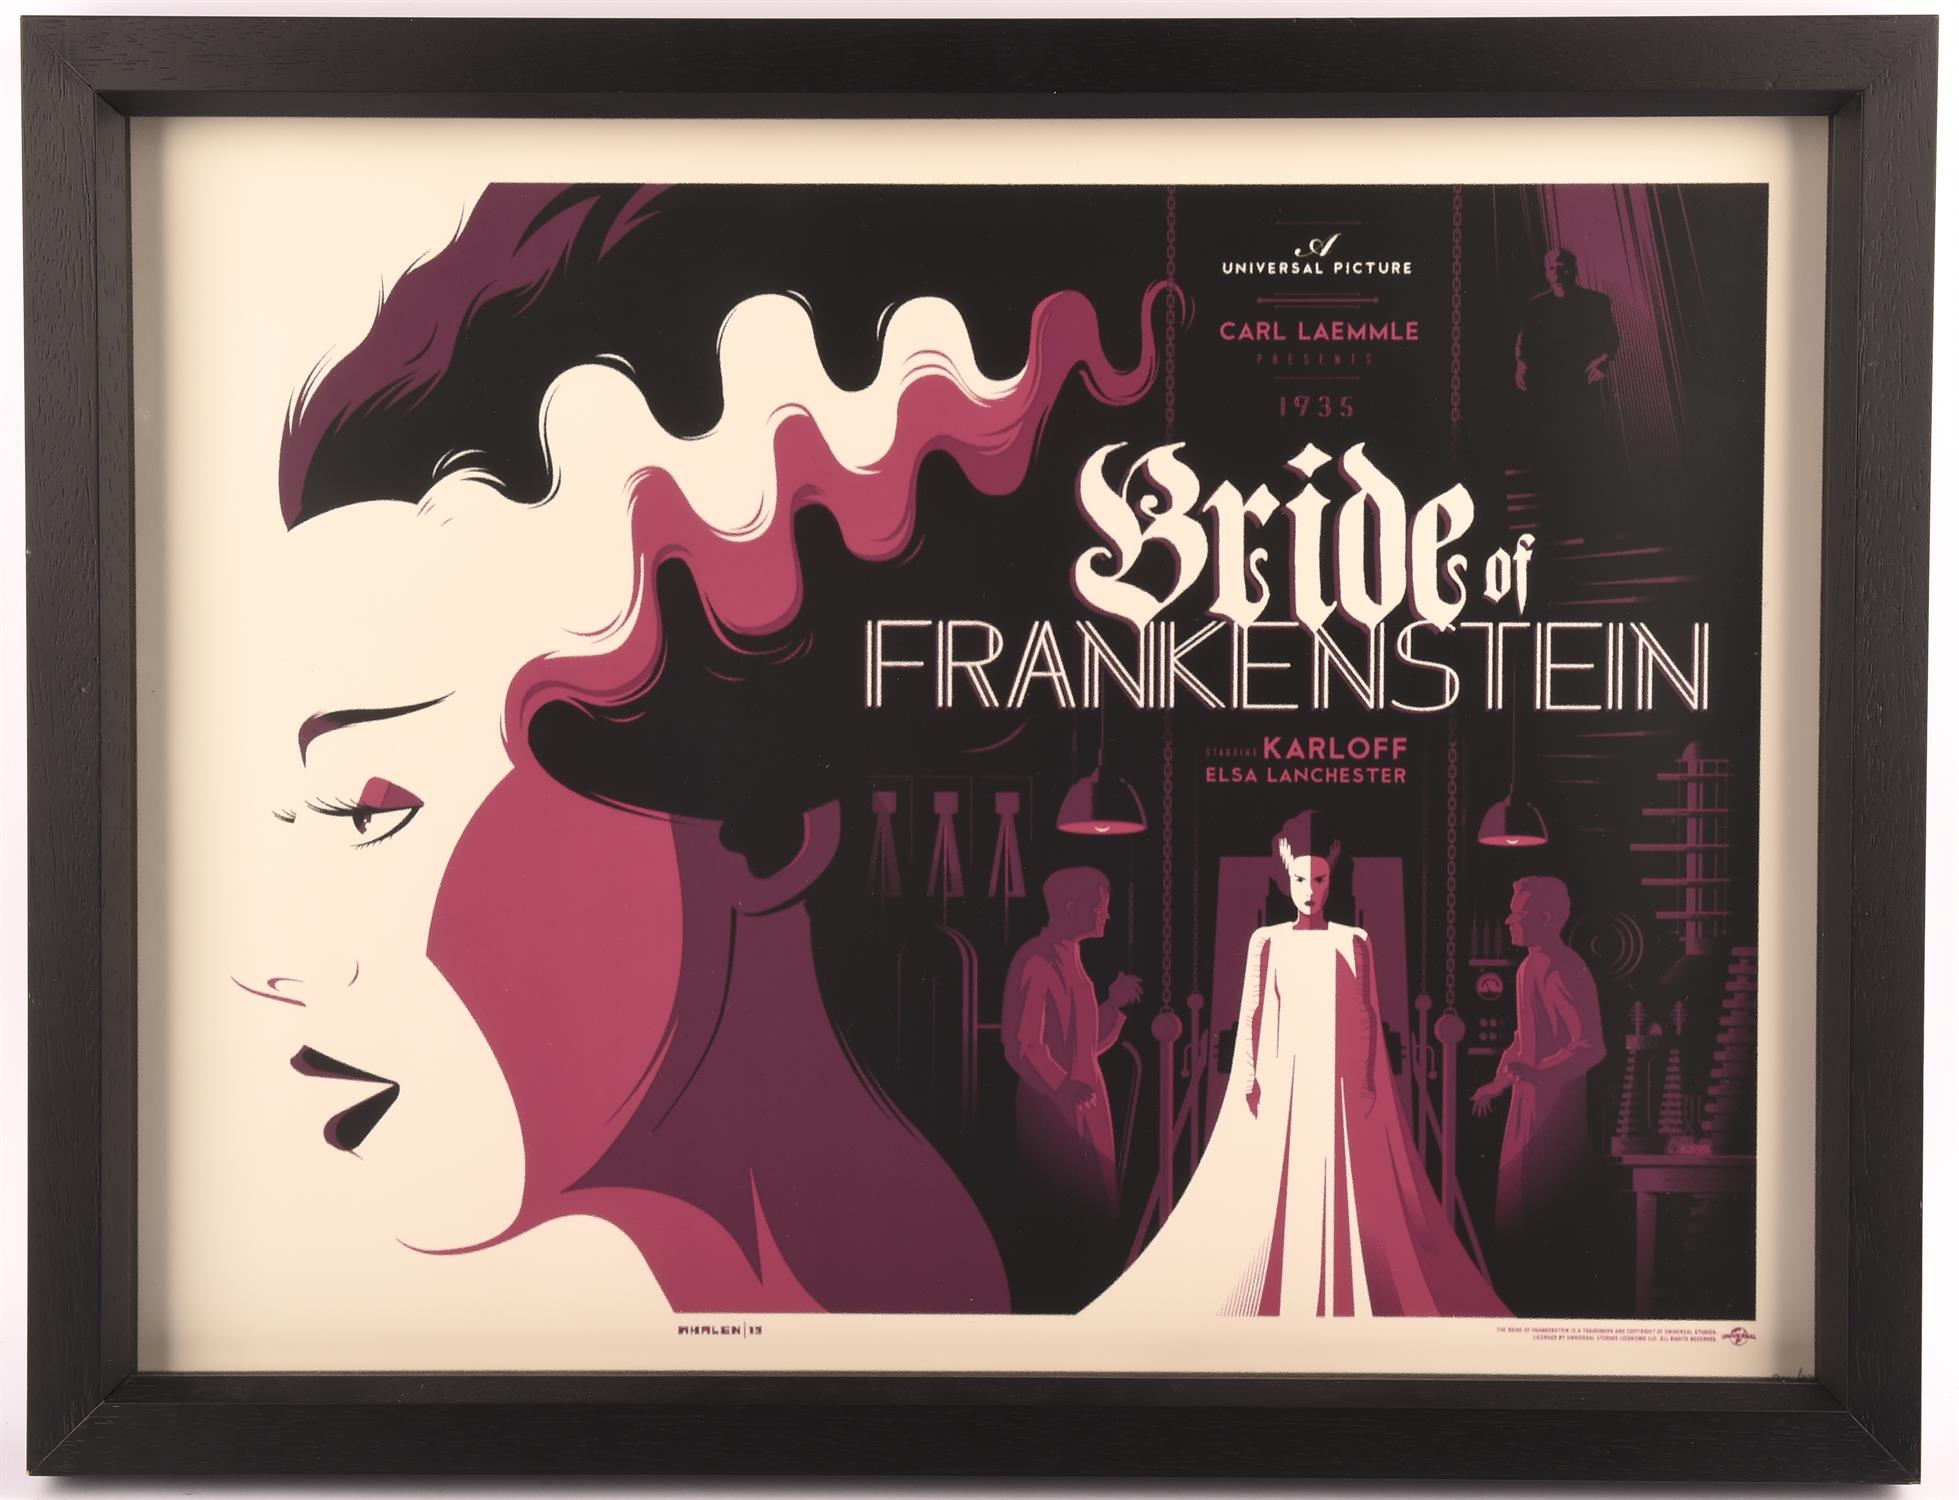 Tom Whalen: The Bride of Frankenstein, The Universal Monsters (2013) Limited edition silkscreen